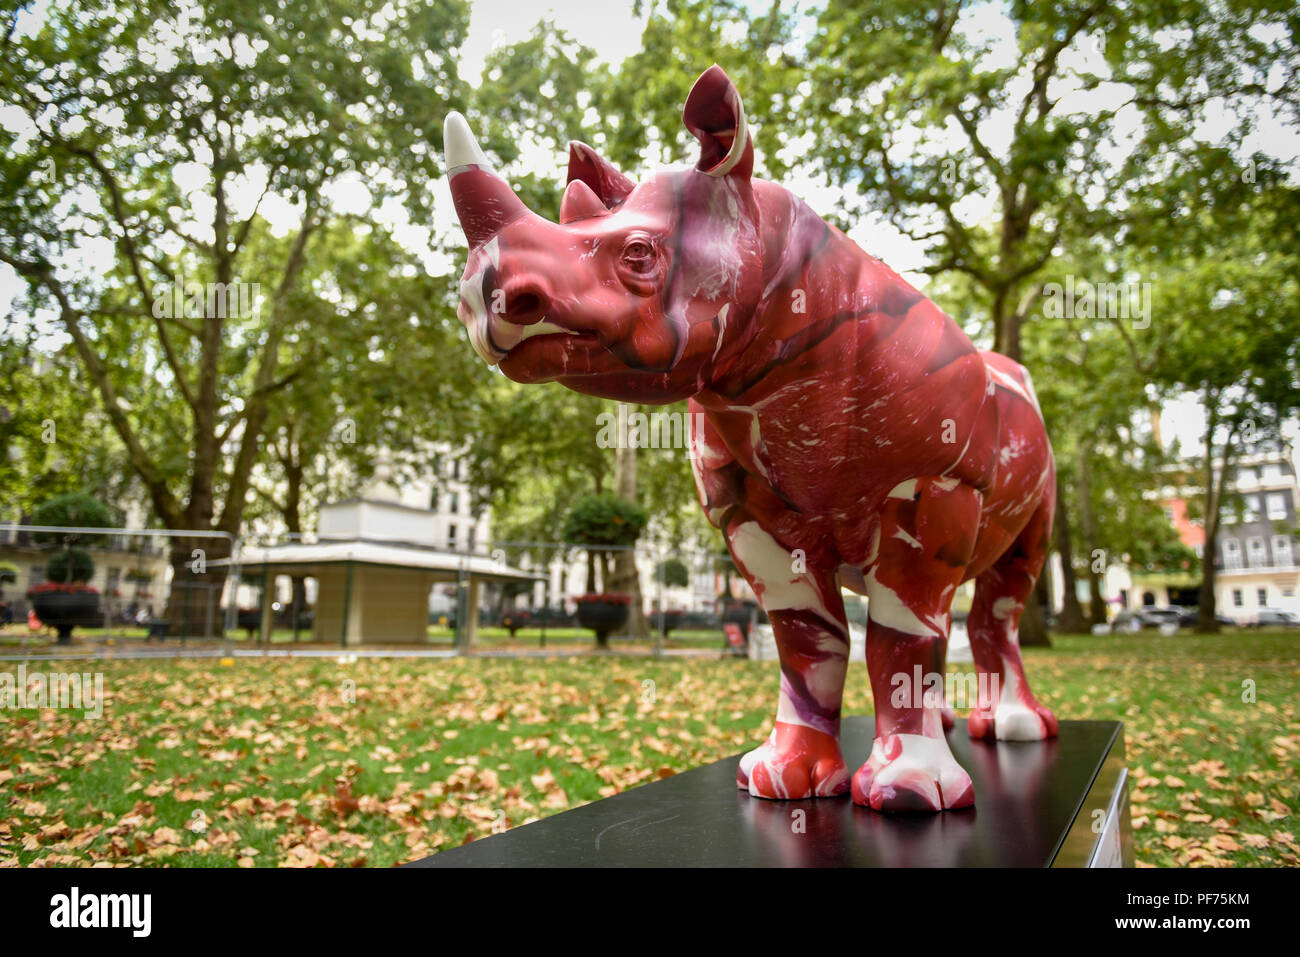 London, UK.  20 August 2018. 'On Cognizance', a rhino painted by Marc Quinn, in Berkeley Square. 21 rhinos are in place at a popular location in central London, forming the Tusk Rhino Trail, until World Rhino Day on 22 September to raise awareness of the severe threat of poaching to the species' survival.  They will then be auctioned by Christie's on 9 October to raise funds for the Tusk animal conservation charity.  Credit: Stephen Chung / Alamy Live News Stock Photo